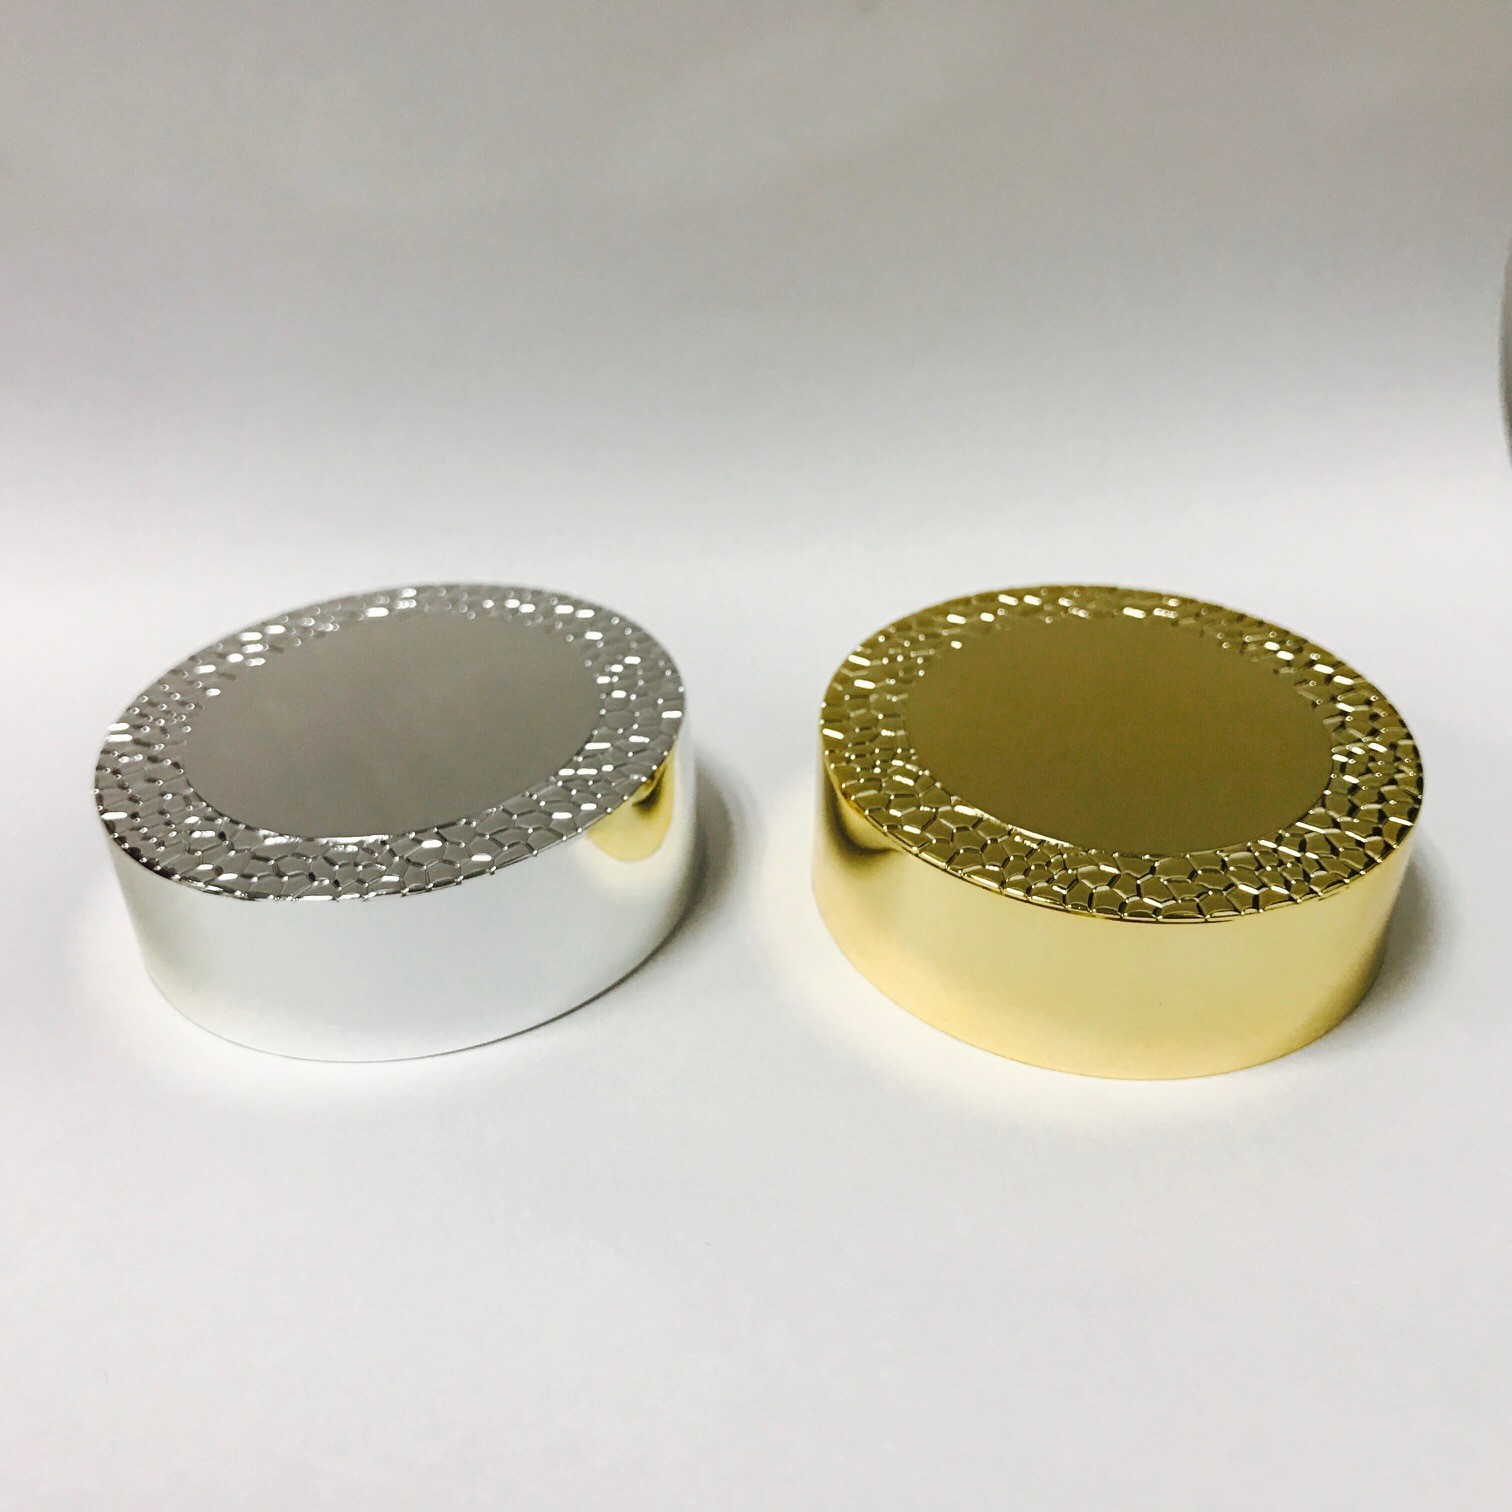 Round electroplating silver & gold cap